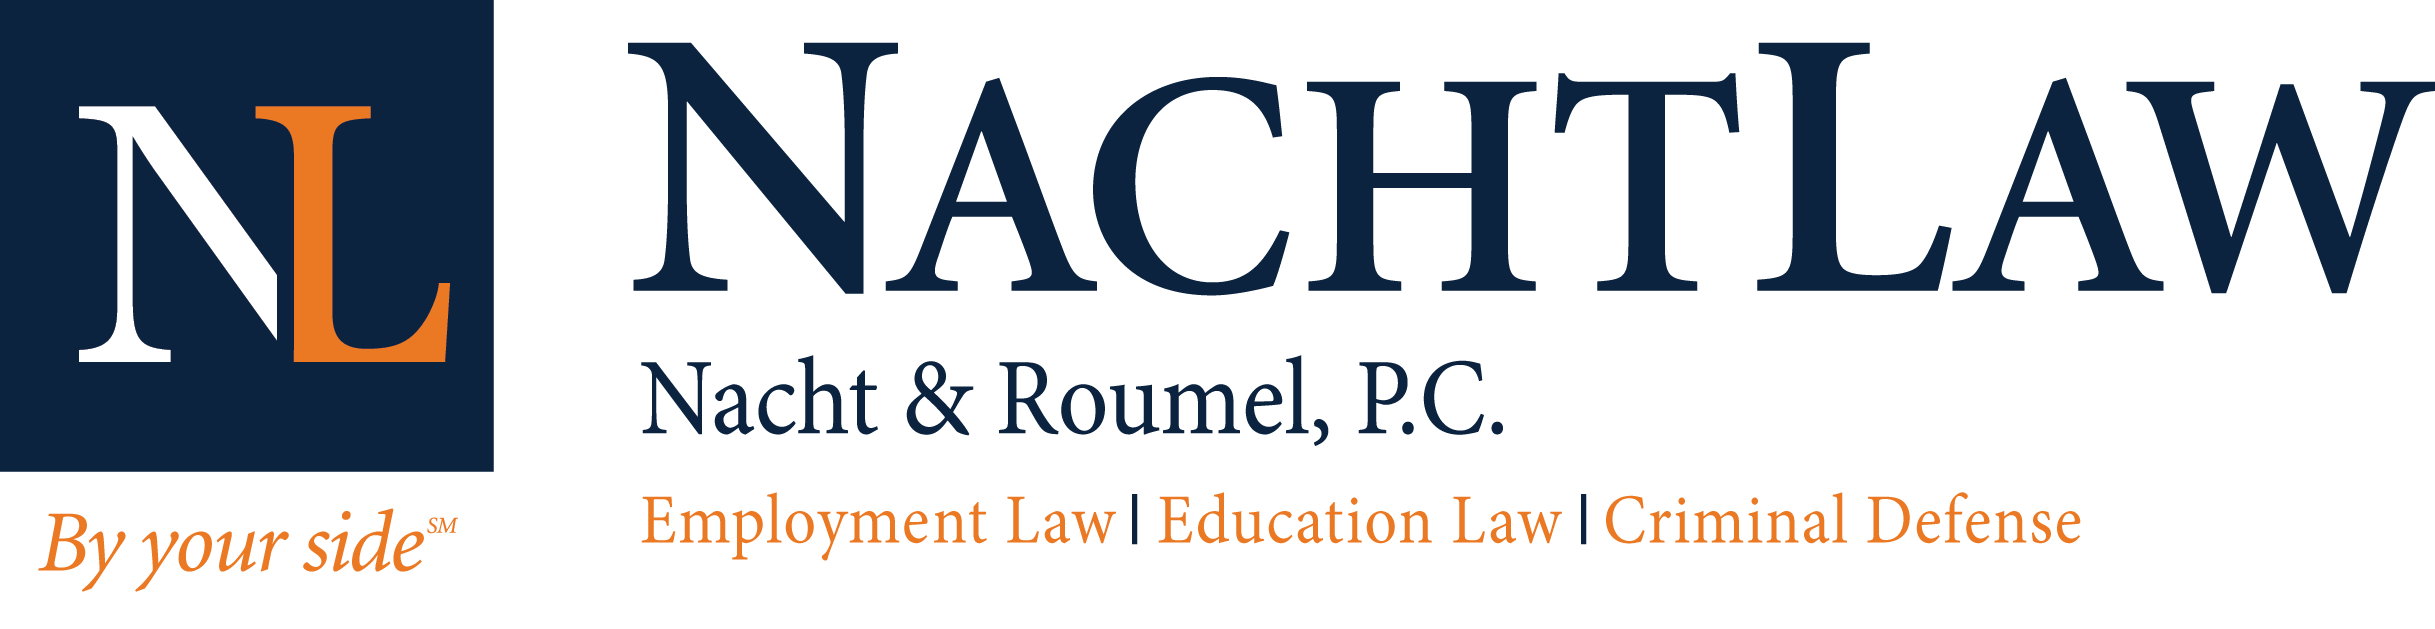 Natch Law | Natch & Roumel, P.C. | By your side | Employment Law | Educational Law | Criminal Defense